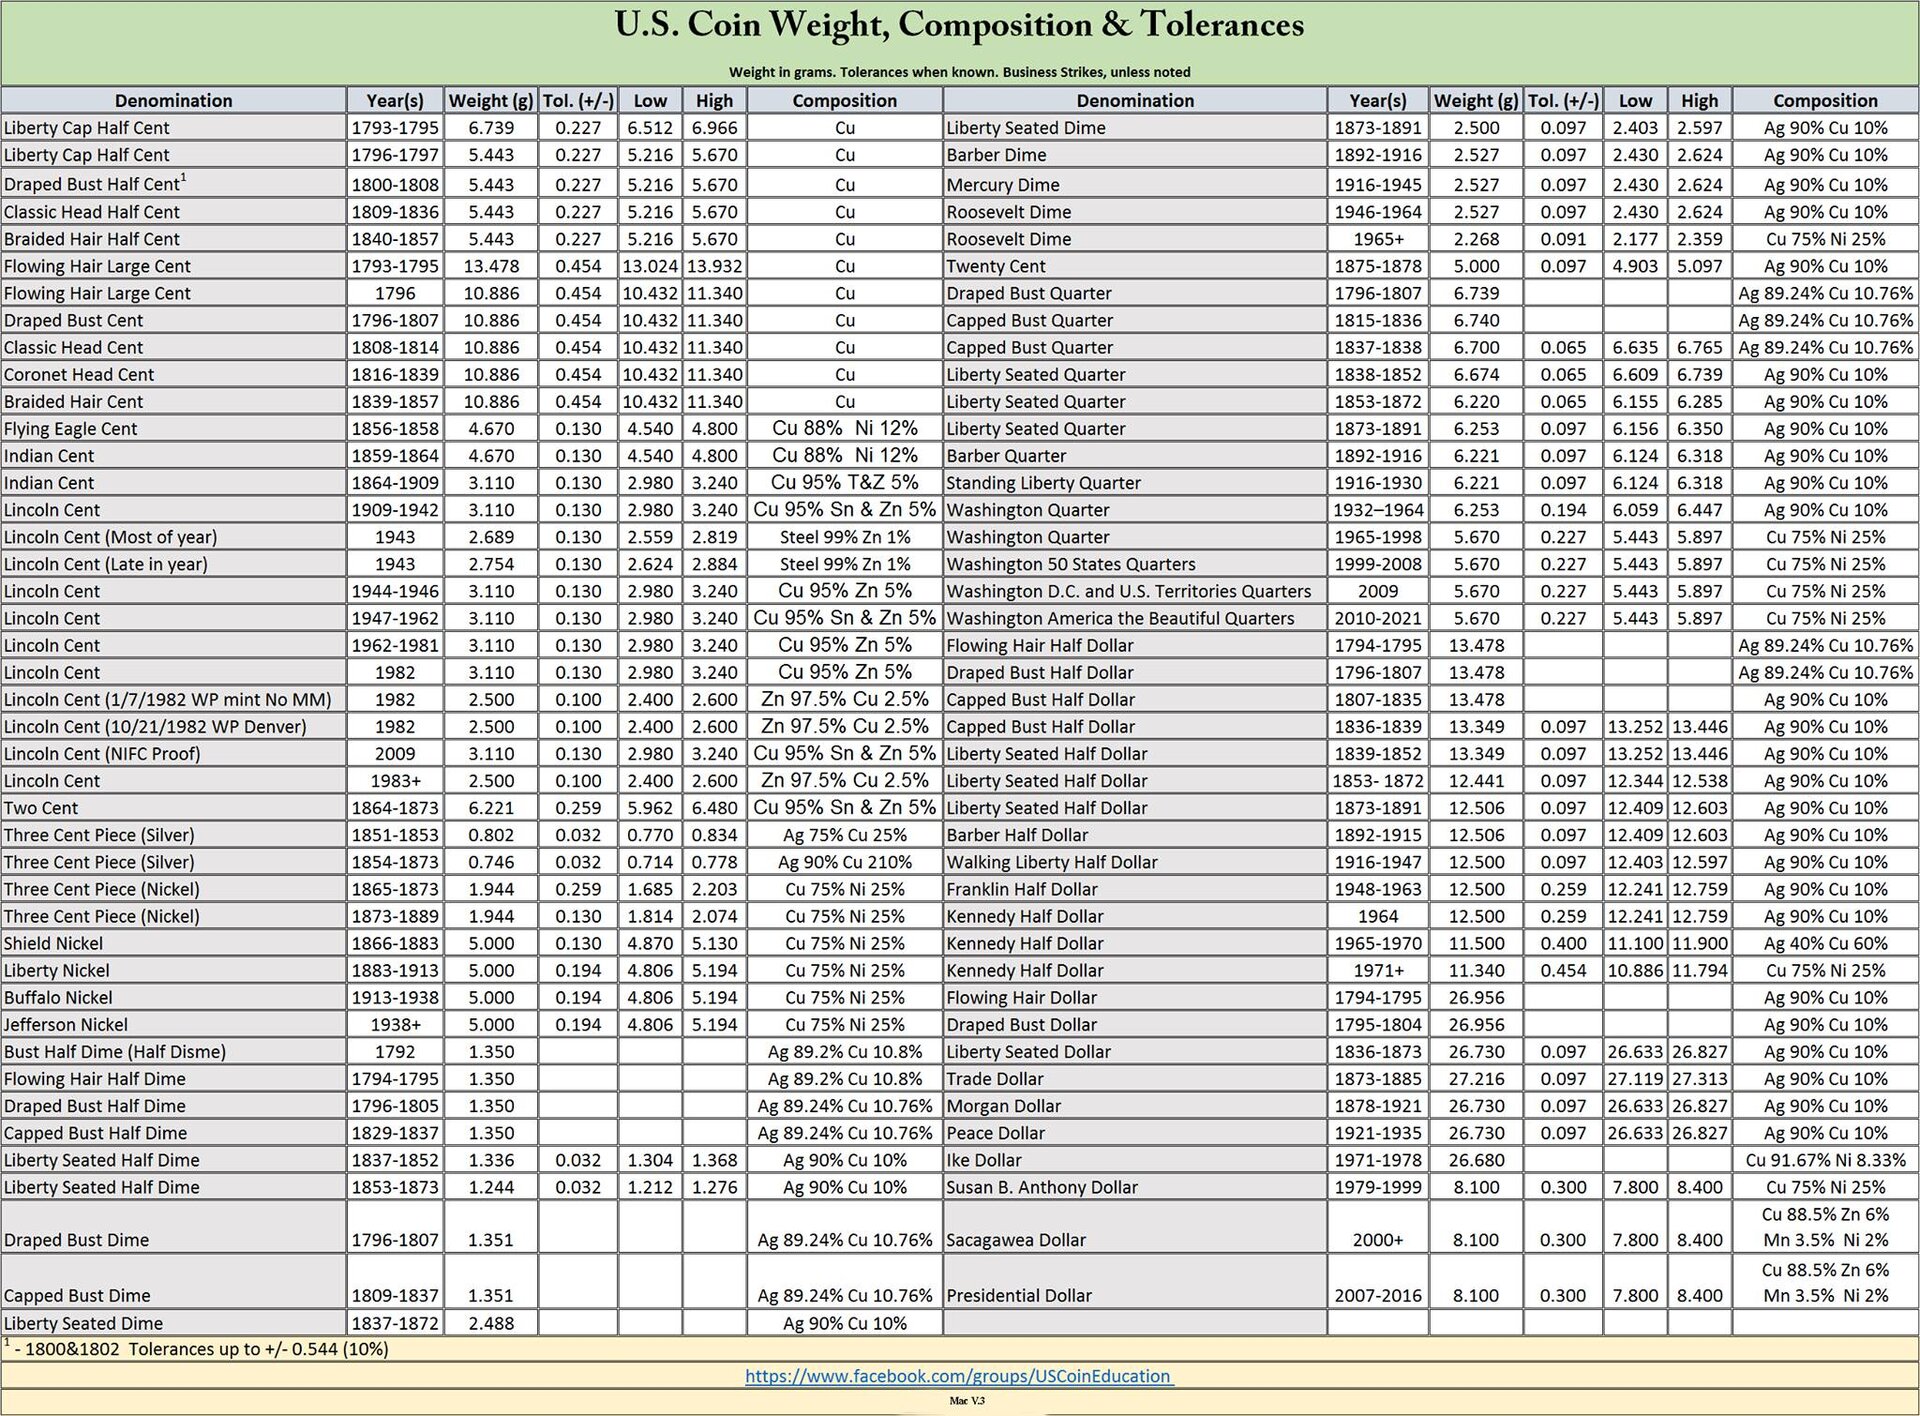 US Coins, weight Composition and Tolererances.jpg